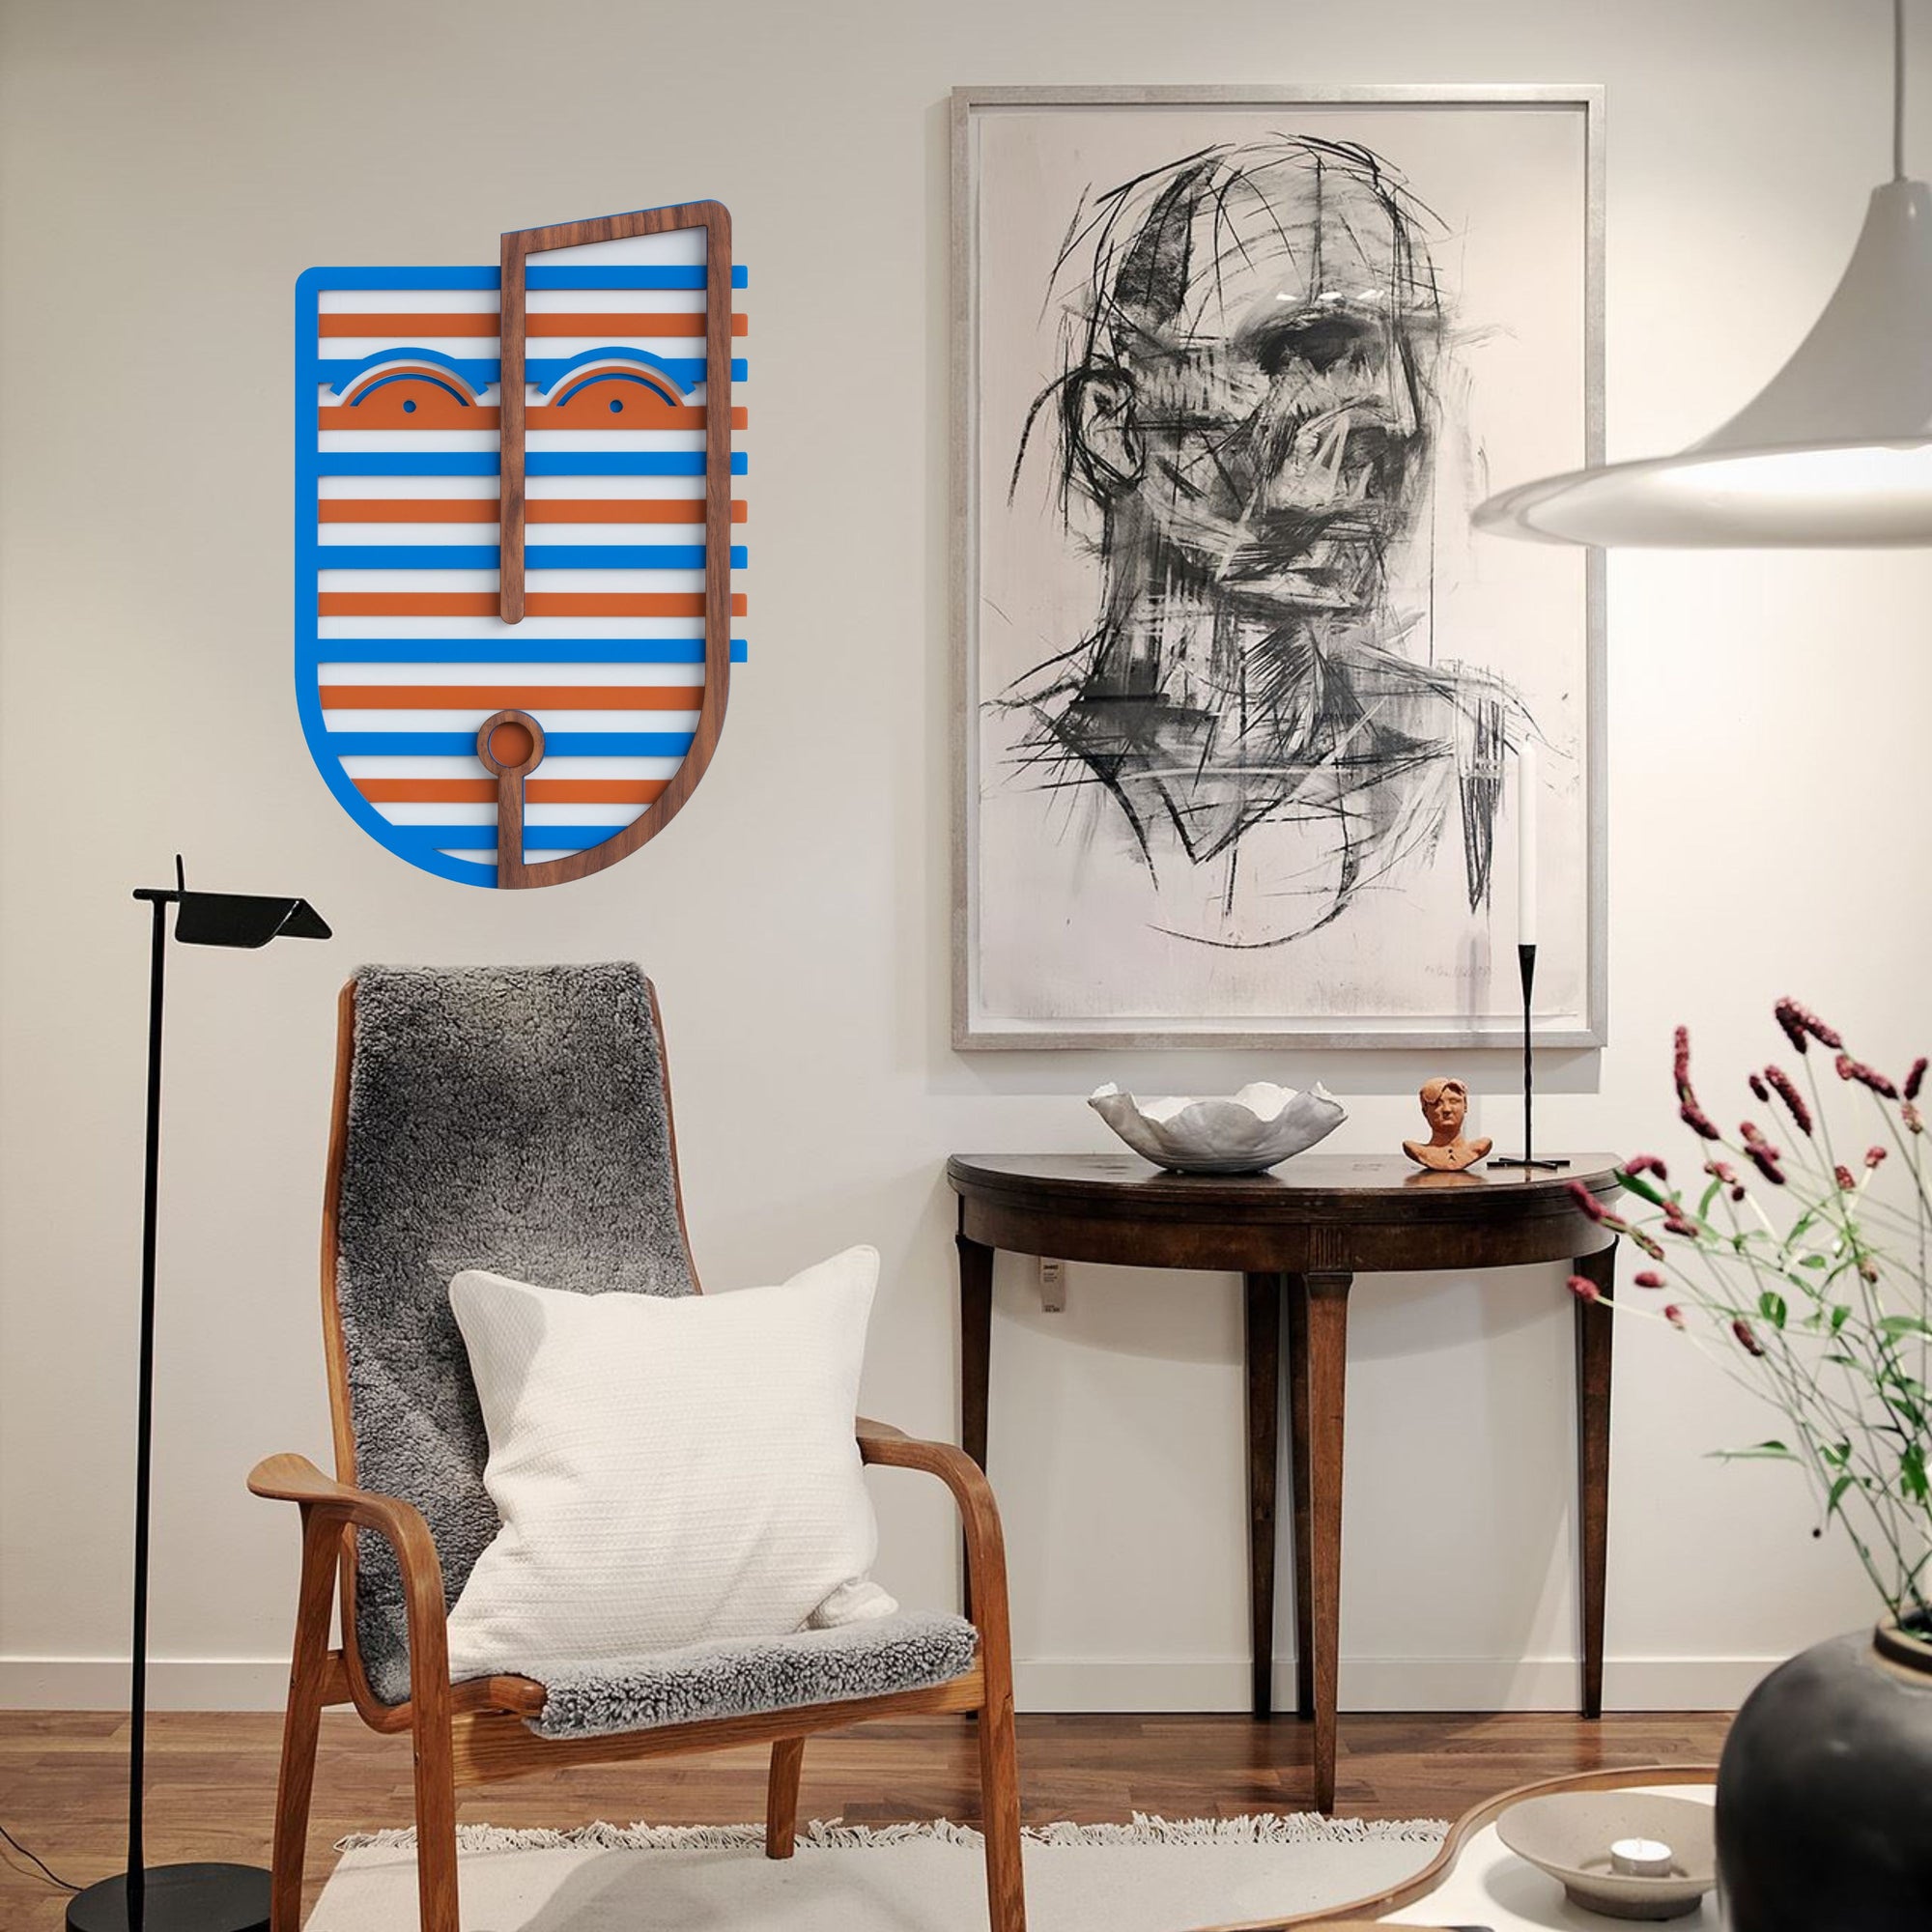 Your walls can now move with our colorful Picasso faces - Wall Hanging